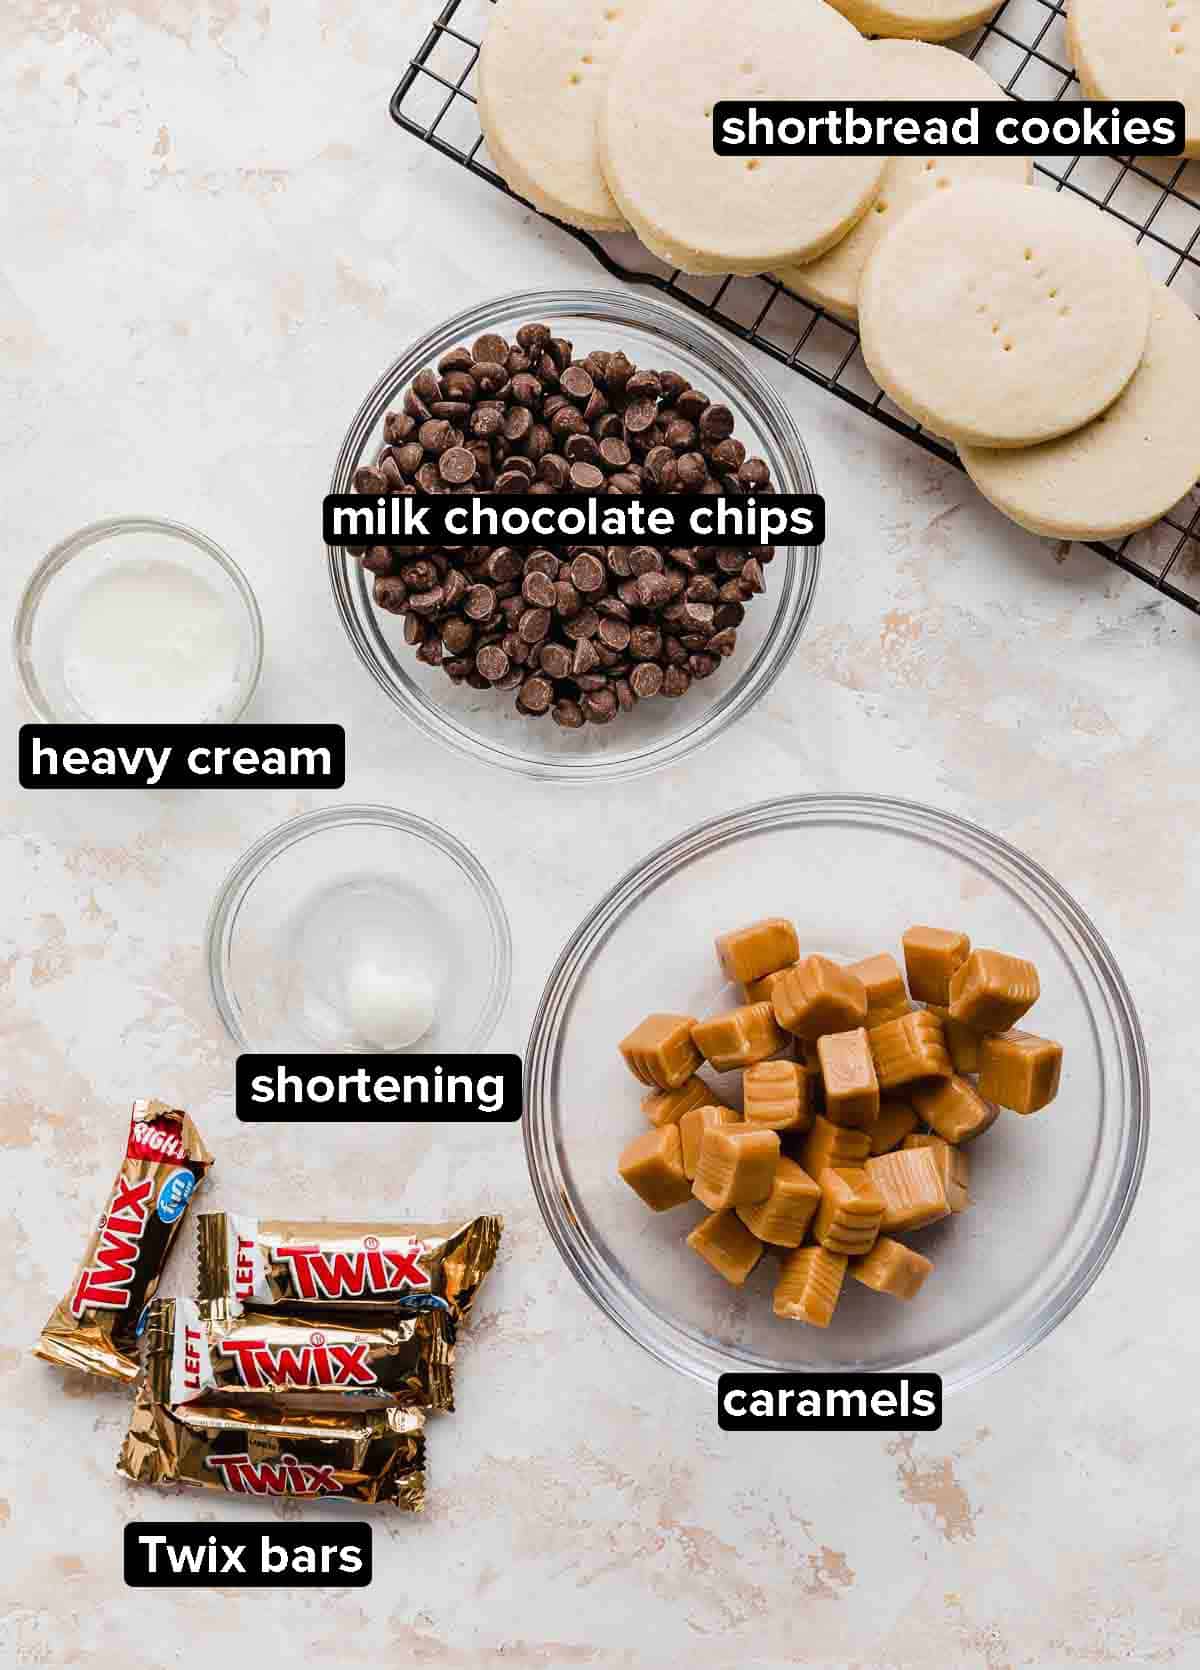 Twix Cookie ingredients on a white and cream textured background: shortbread cookies, caramels, chocolate chips, Twix bars, shortening, and heavy cream.